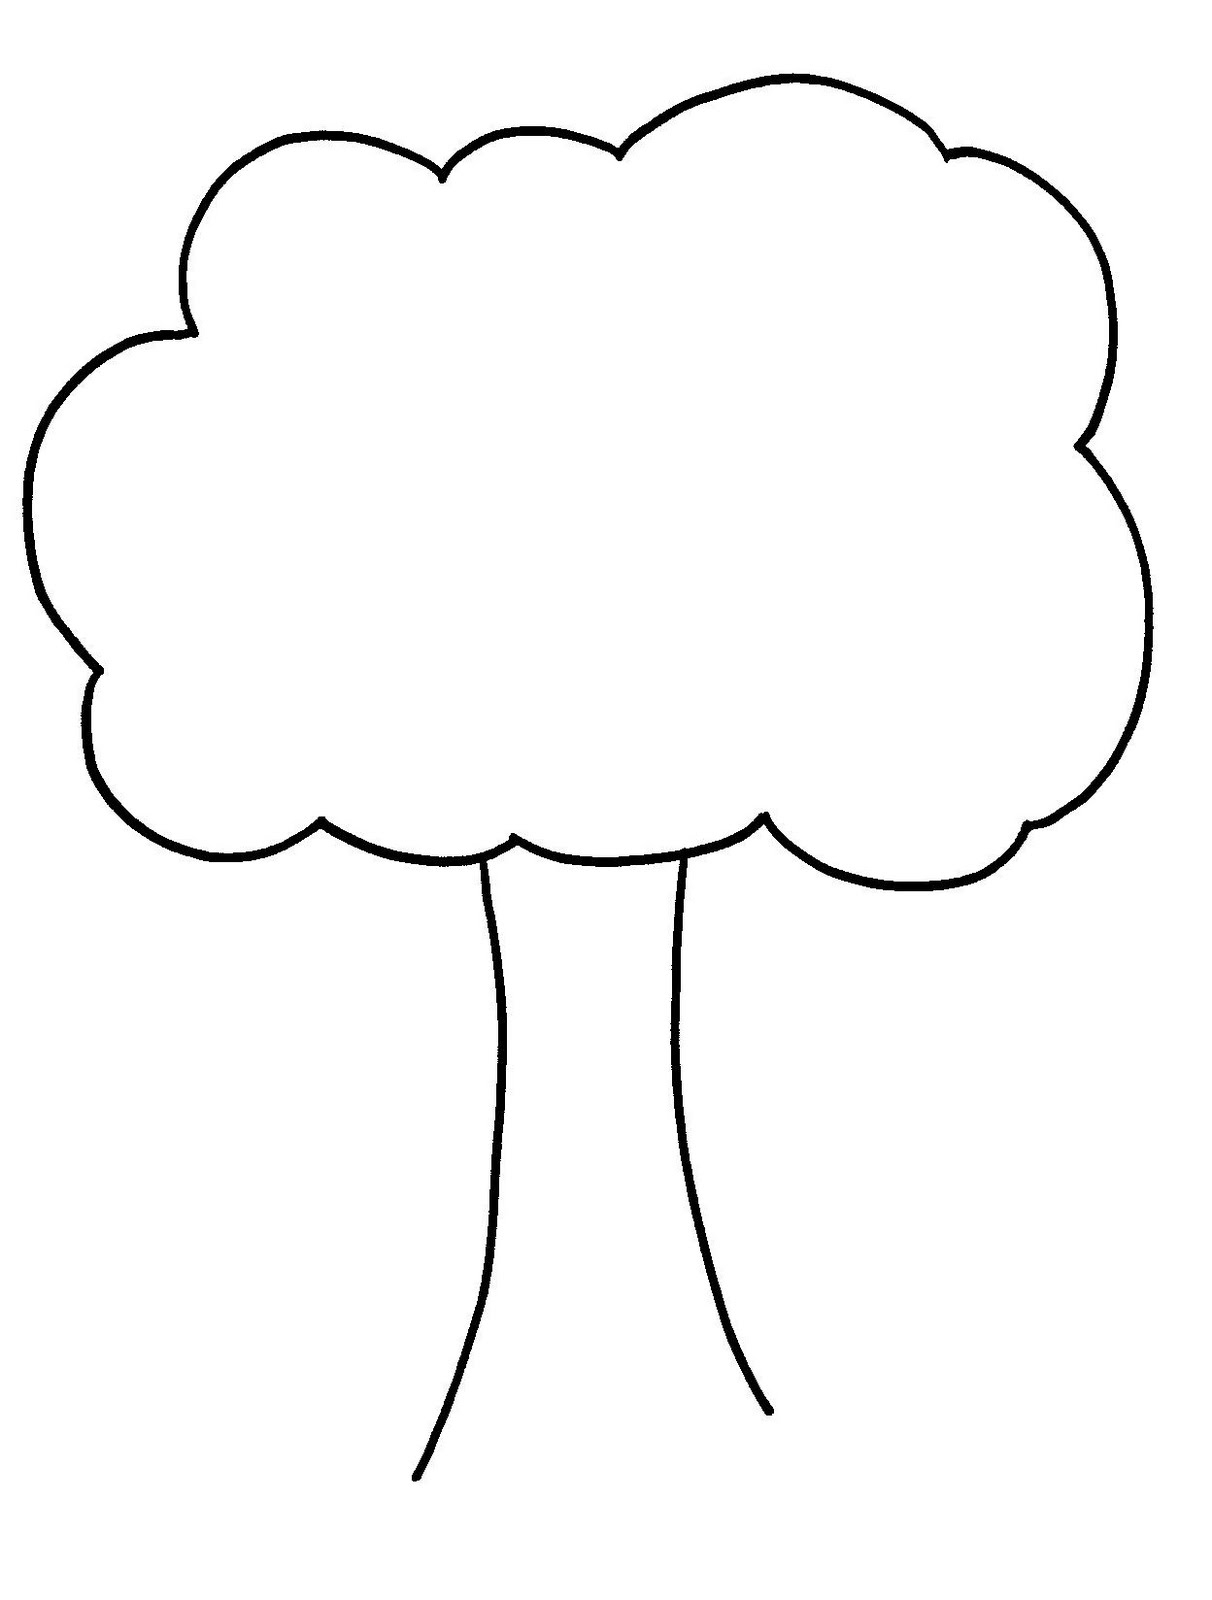 Free Stencil Of A Tree Outline, Download Free Clip Art, Free Clip - Free Printable Palm Tree Template